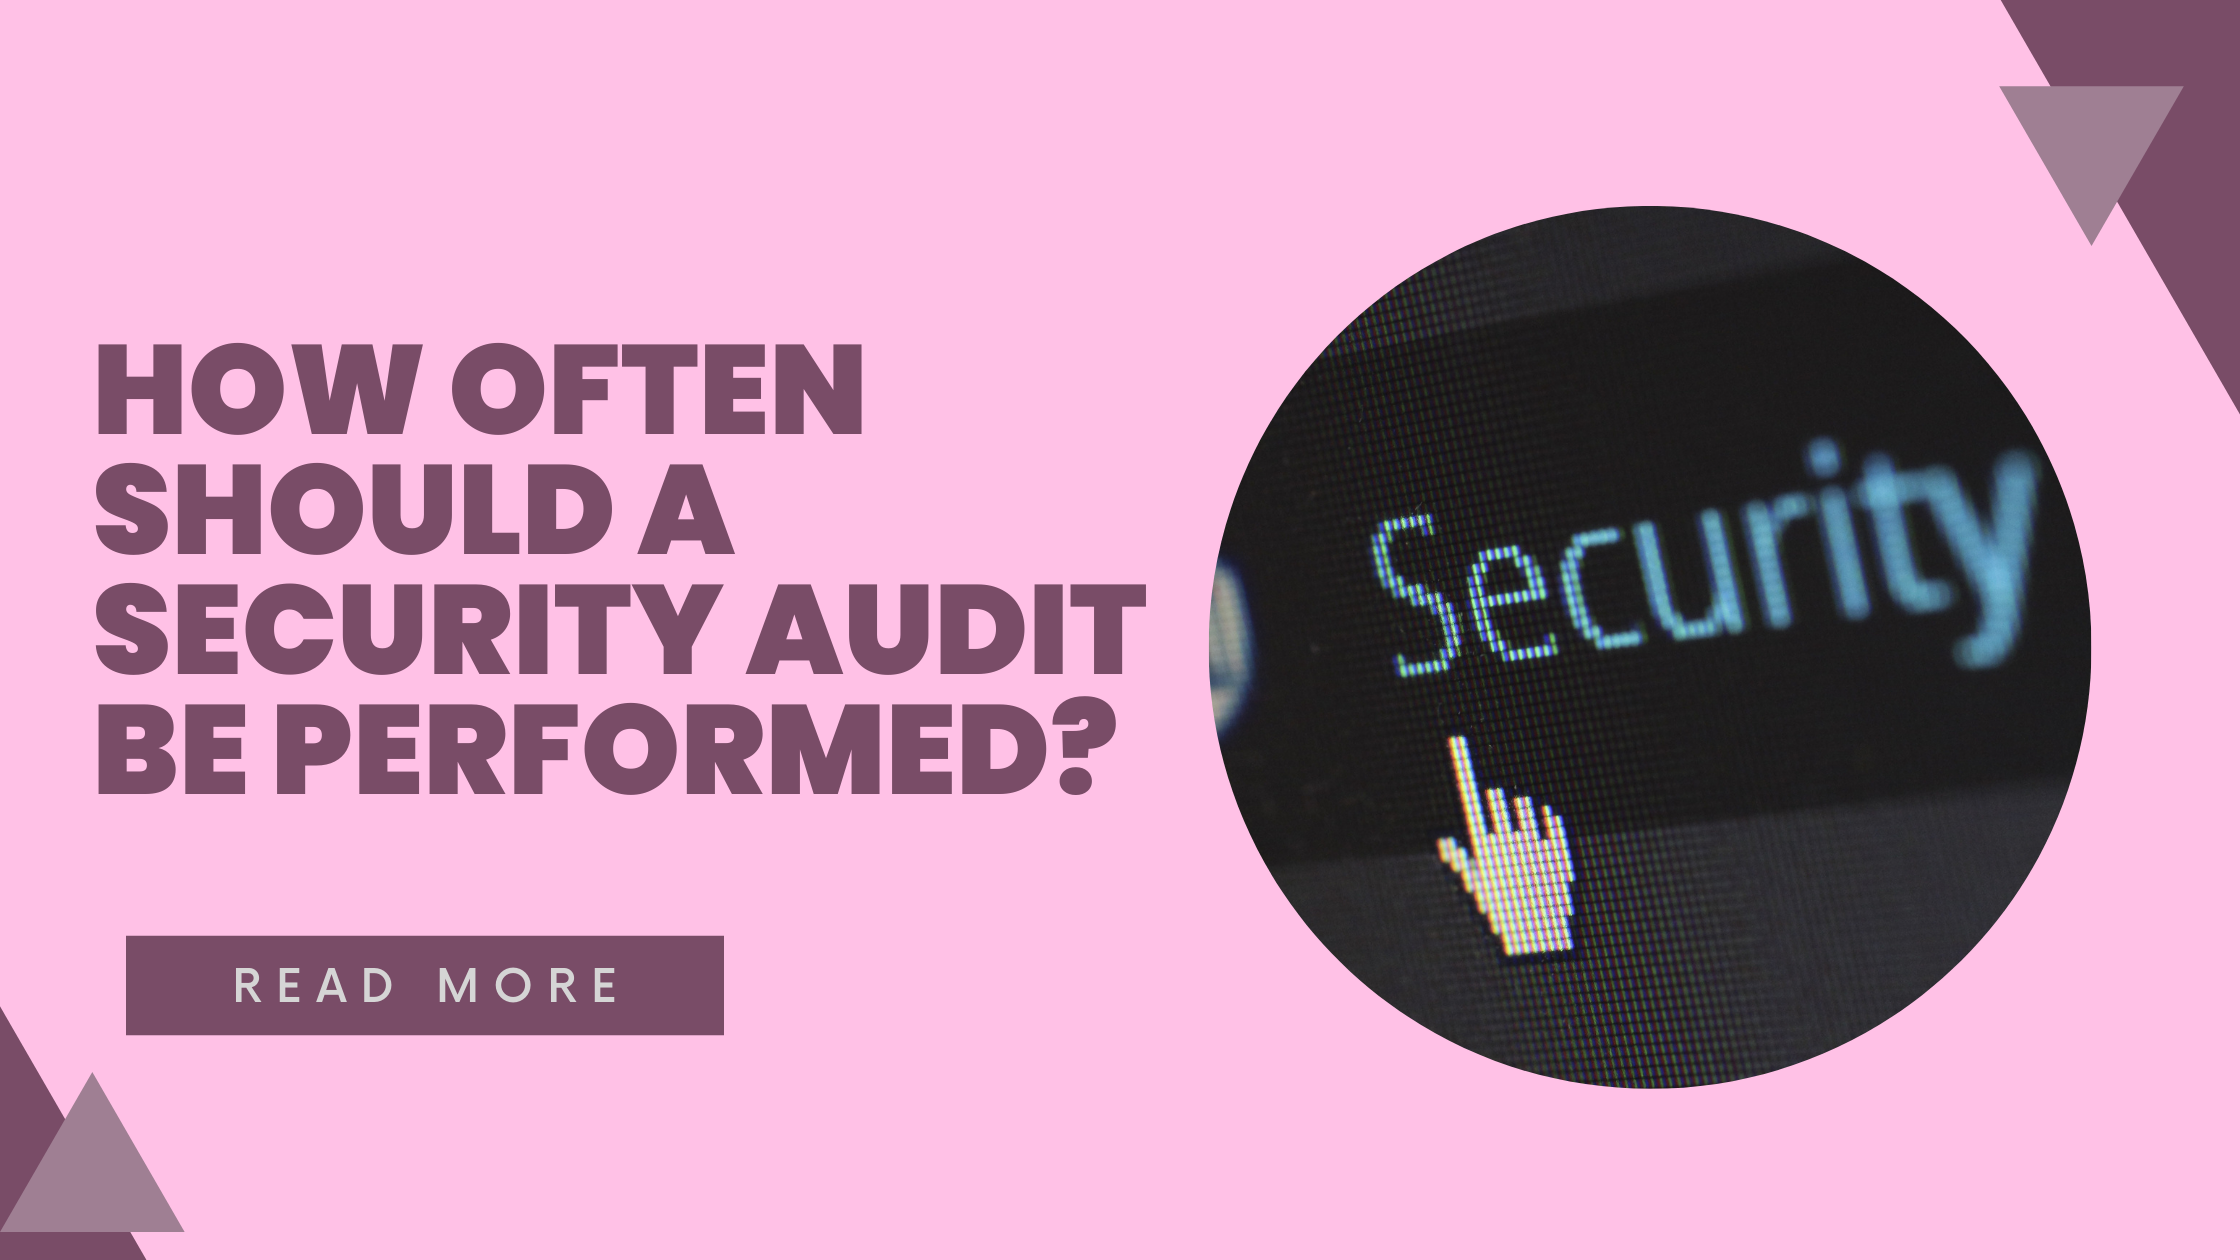 How often should a security audit be performed